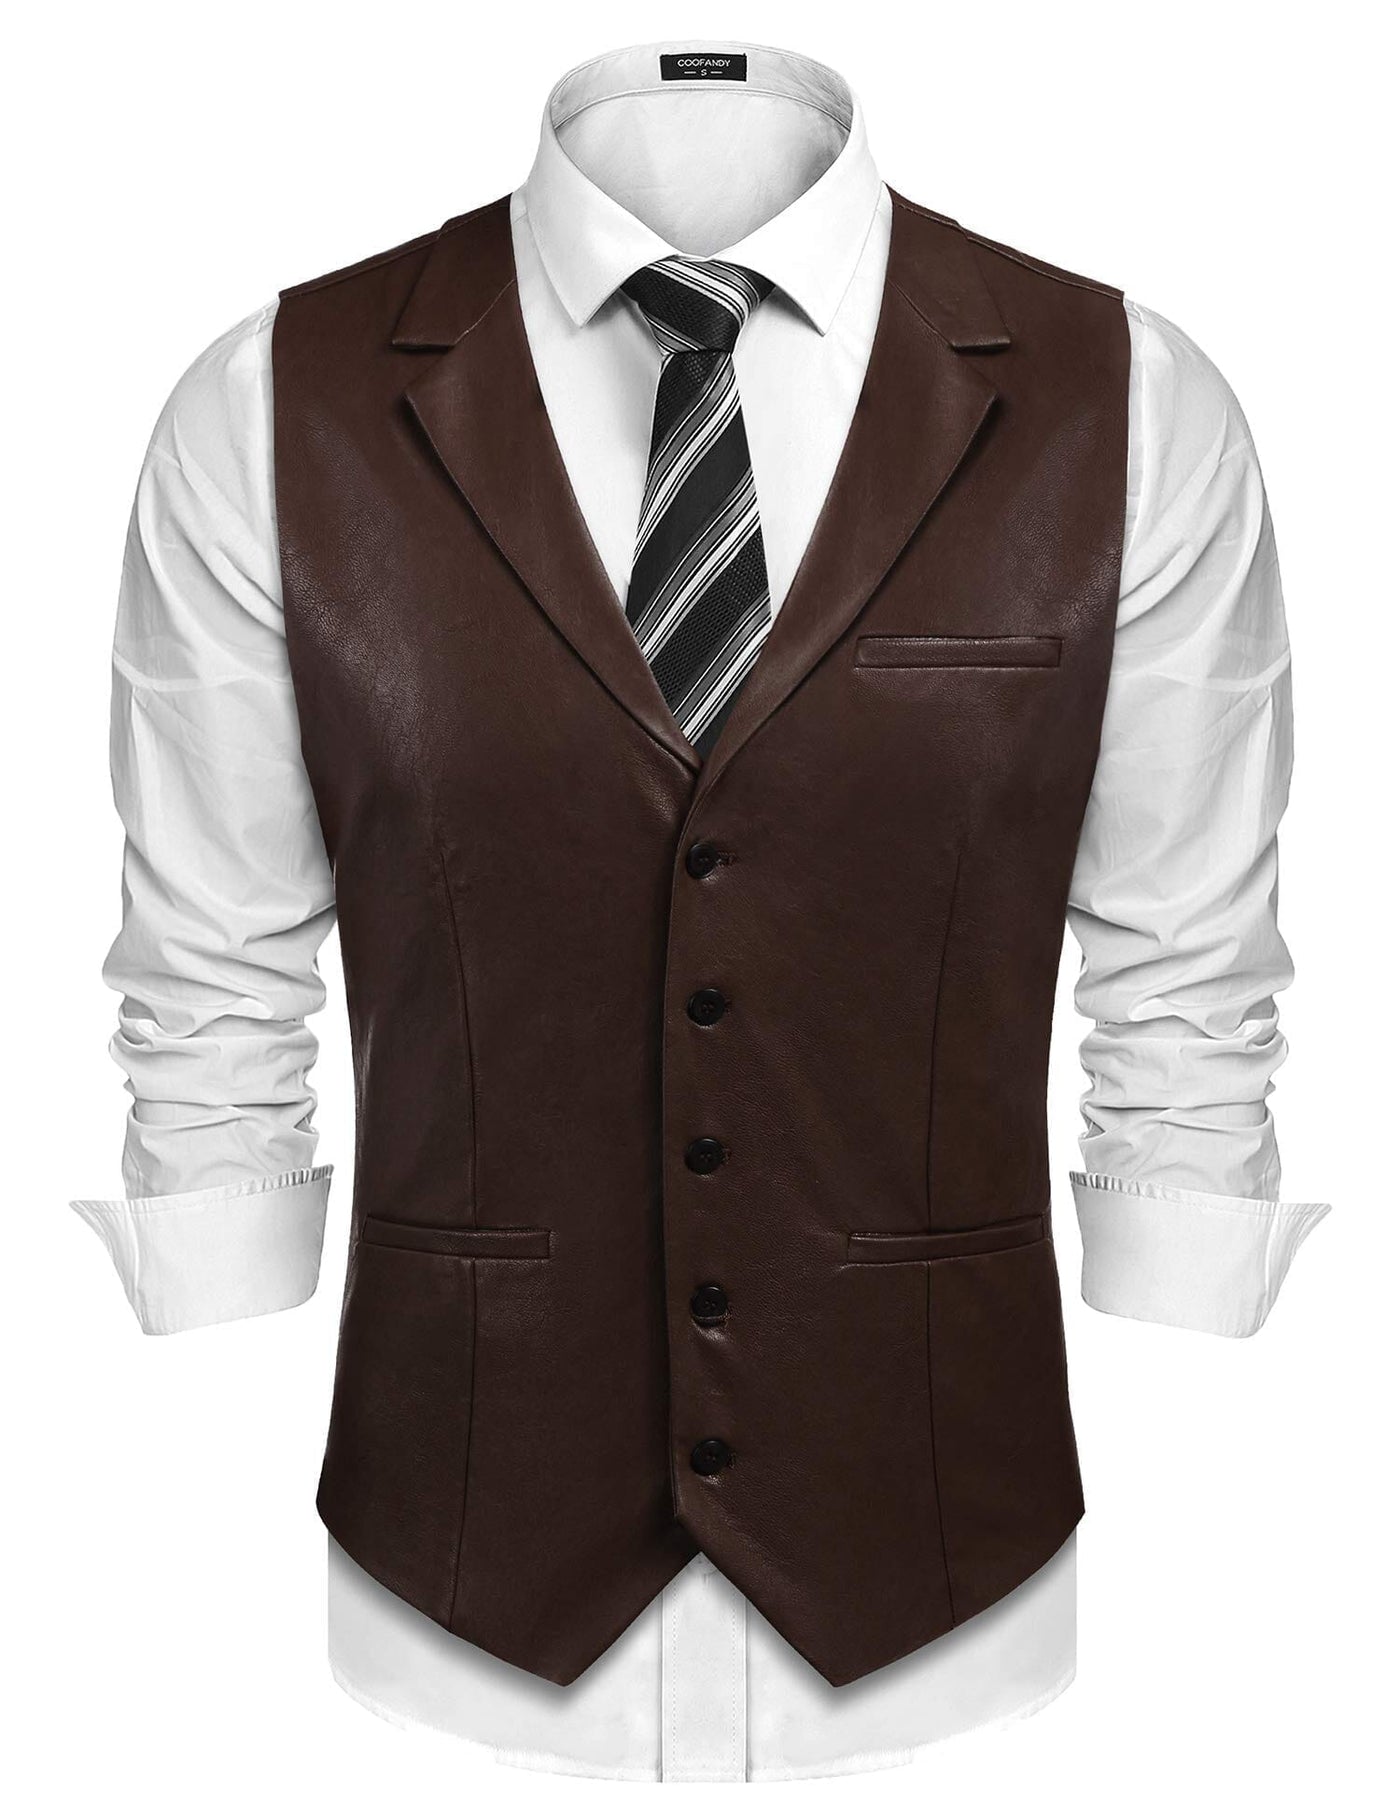 Coofandy Leather Vest (US Only) Vest coofandy Coffee S 